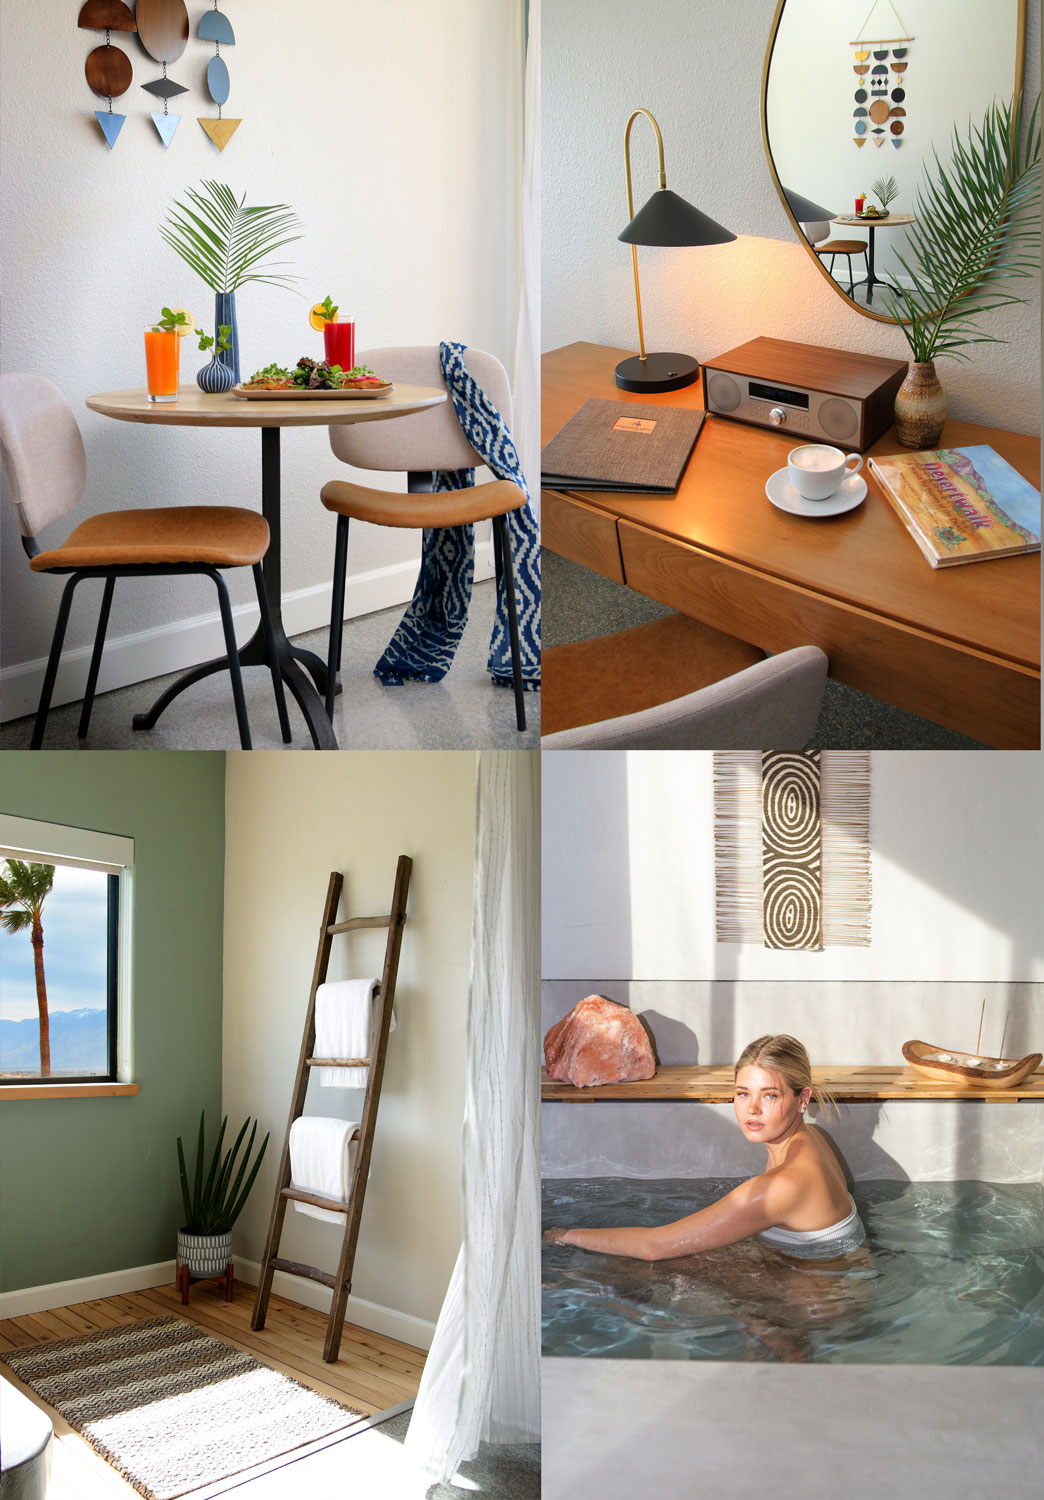 Amenities of the Spa Suites: bistro table, writing desk, and soaking tub